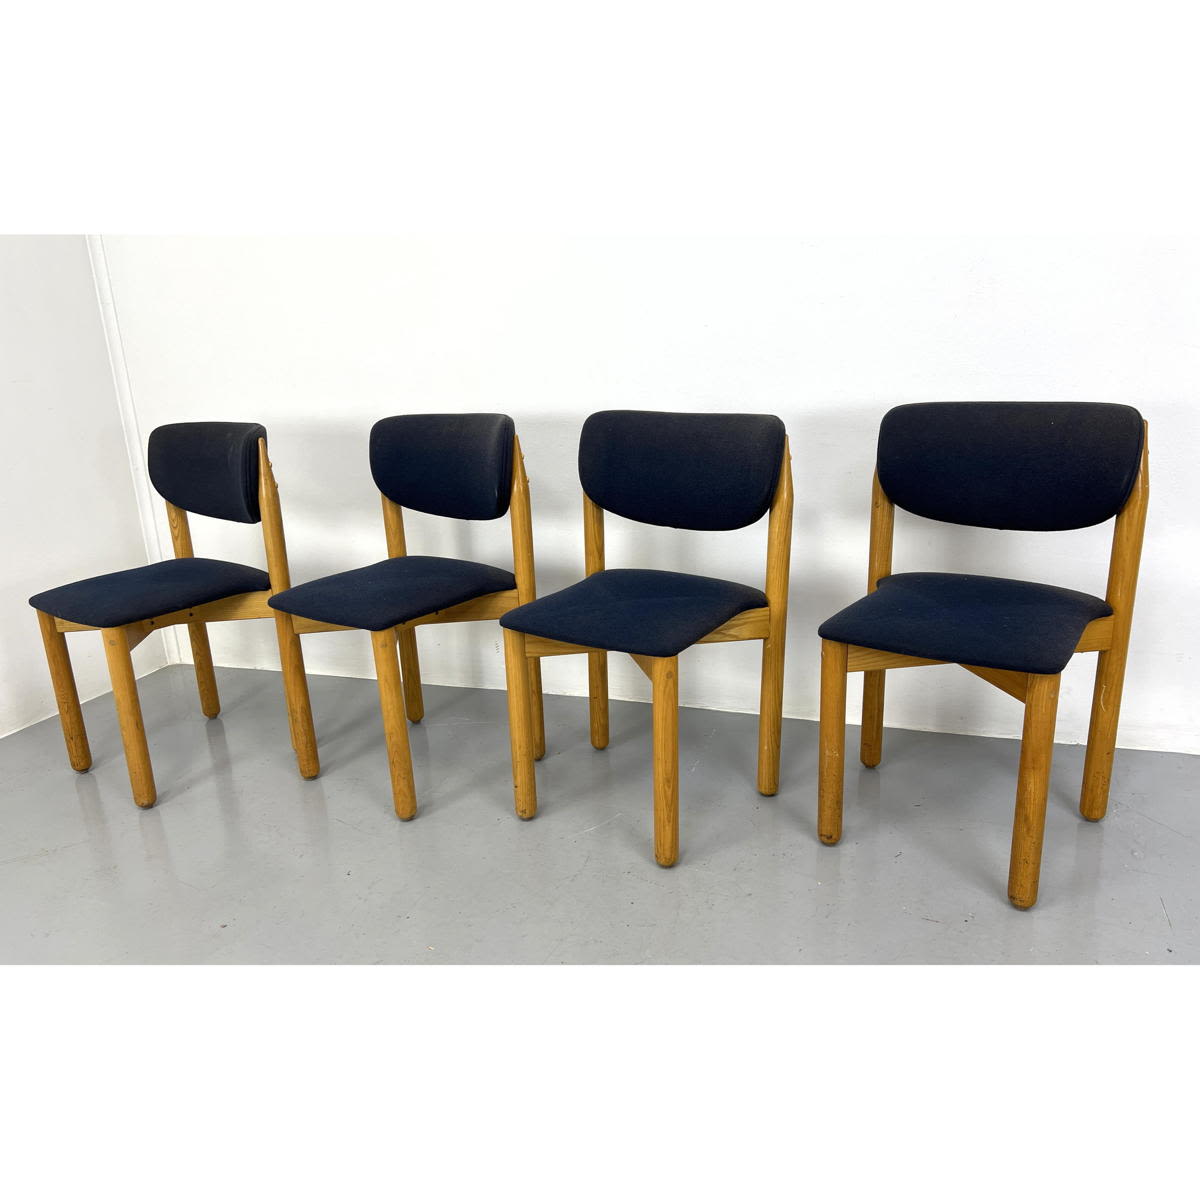 Set of 4 Italian Style Stackable Chairs.